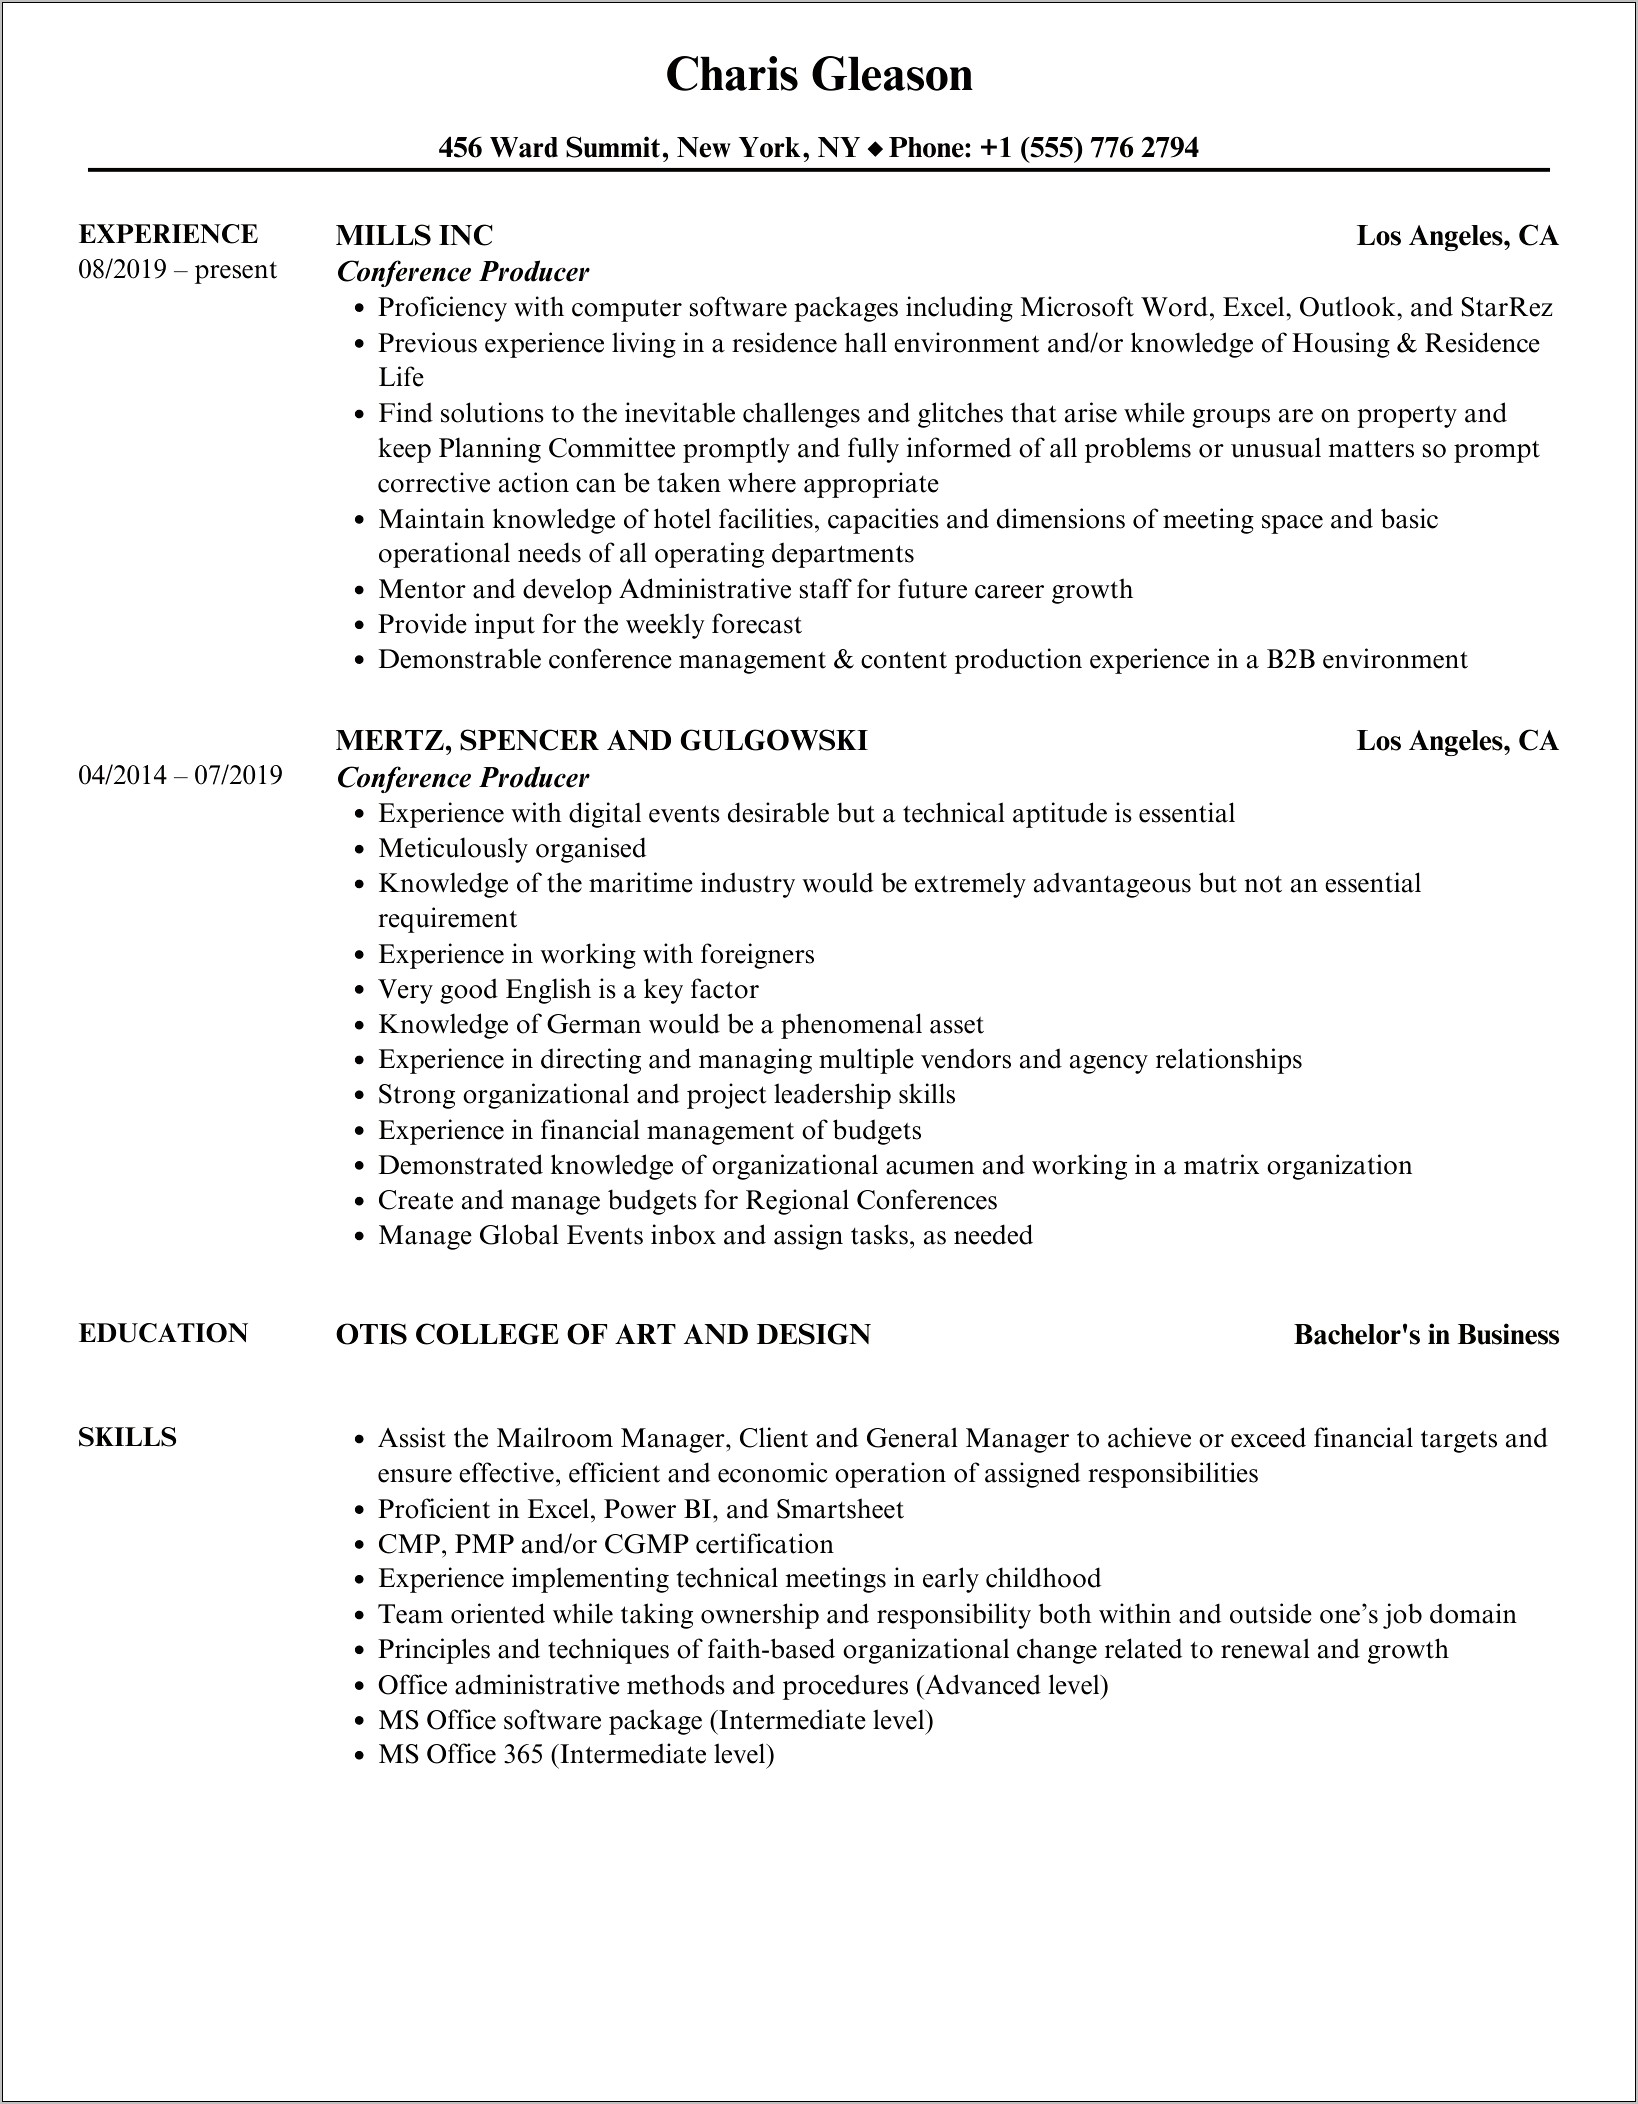 Conference Objectives Examples In Resume